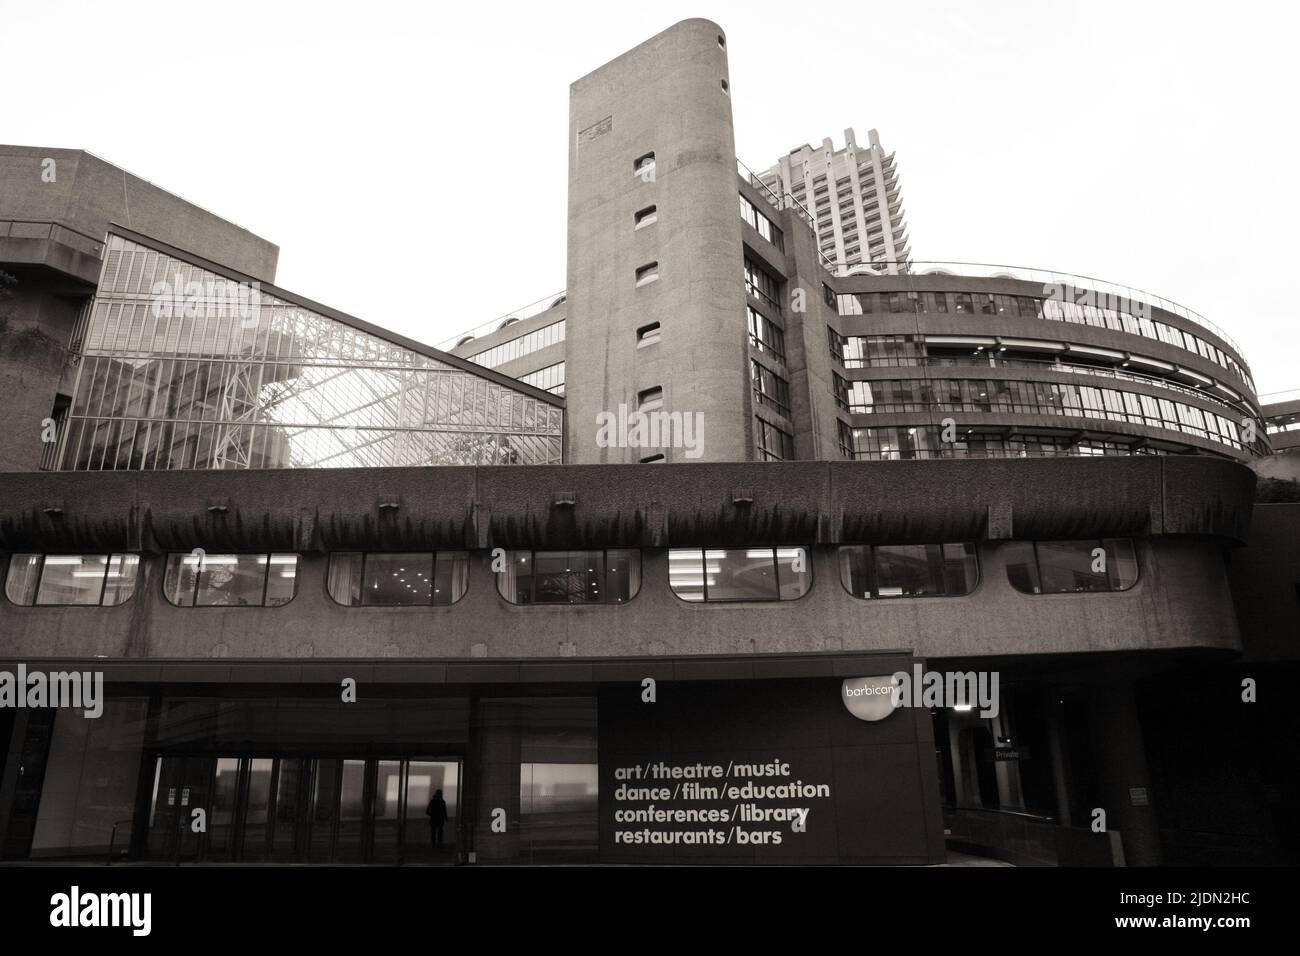 LONDON - FEB 14: Main entrance of Barbican Center, the largest performing arts centre in Europe, designed by Chamberlin, Powell and Bon, opened 1982. Stock Photo